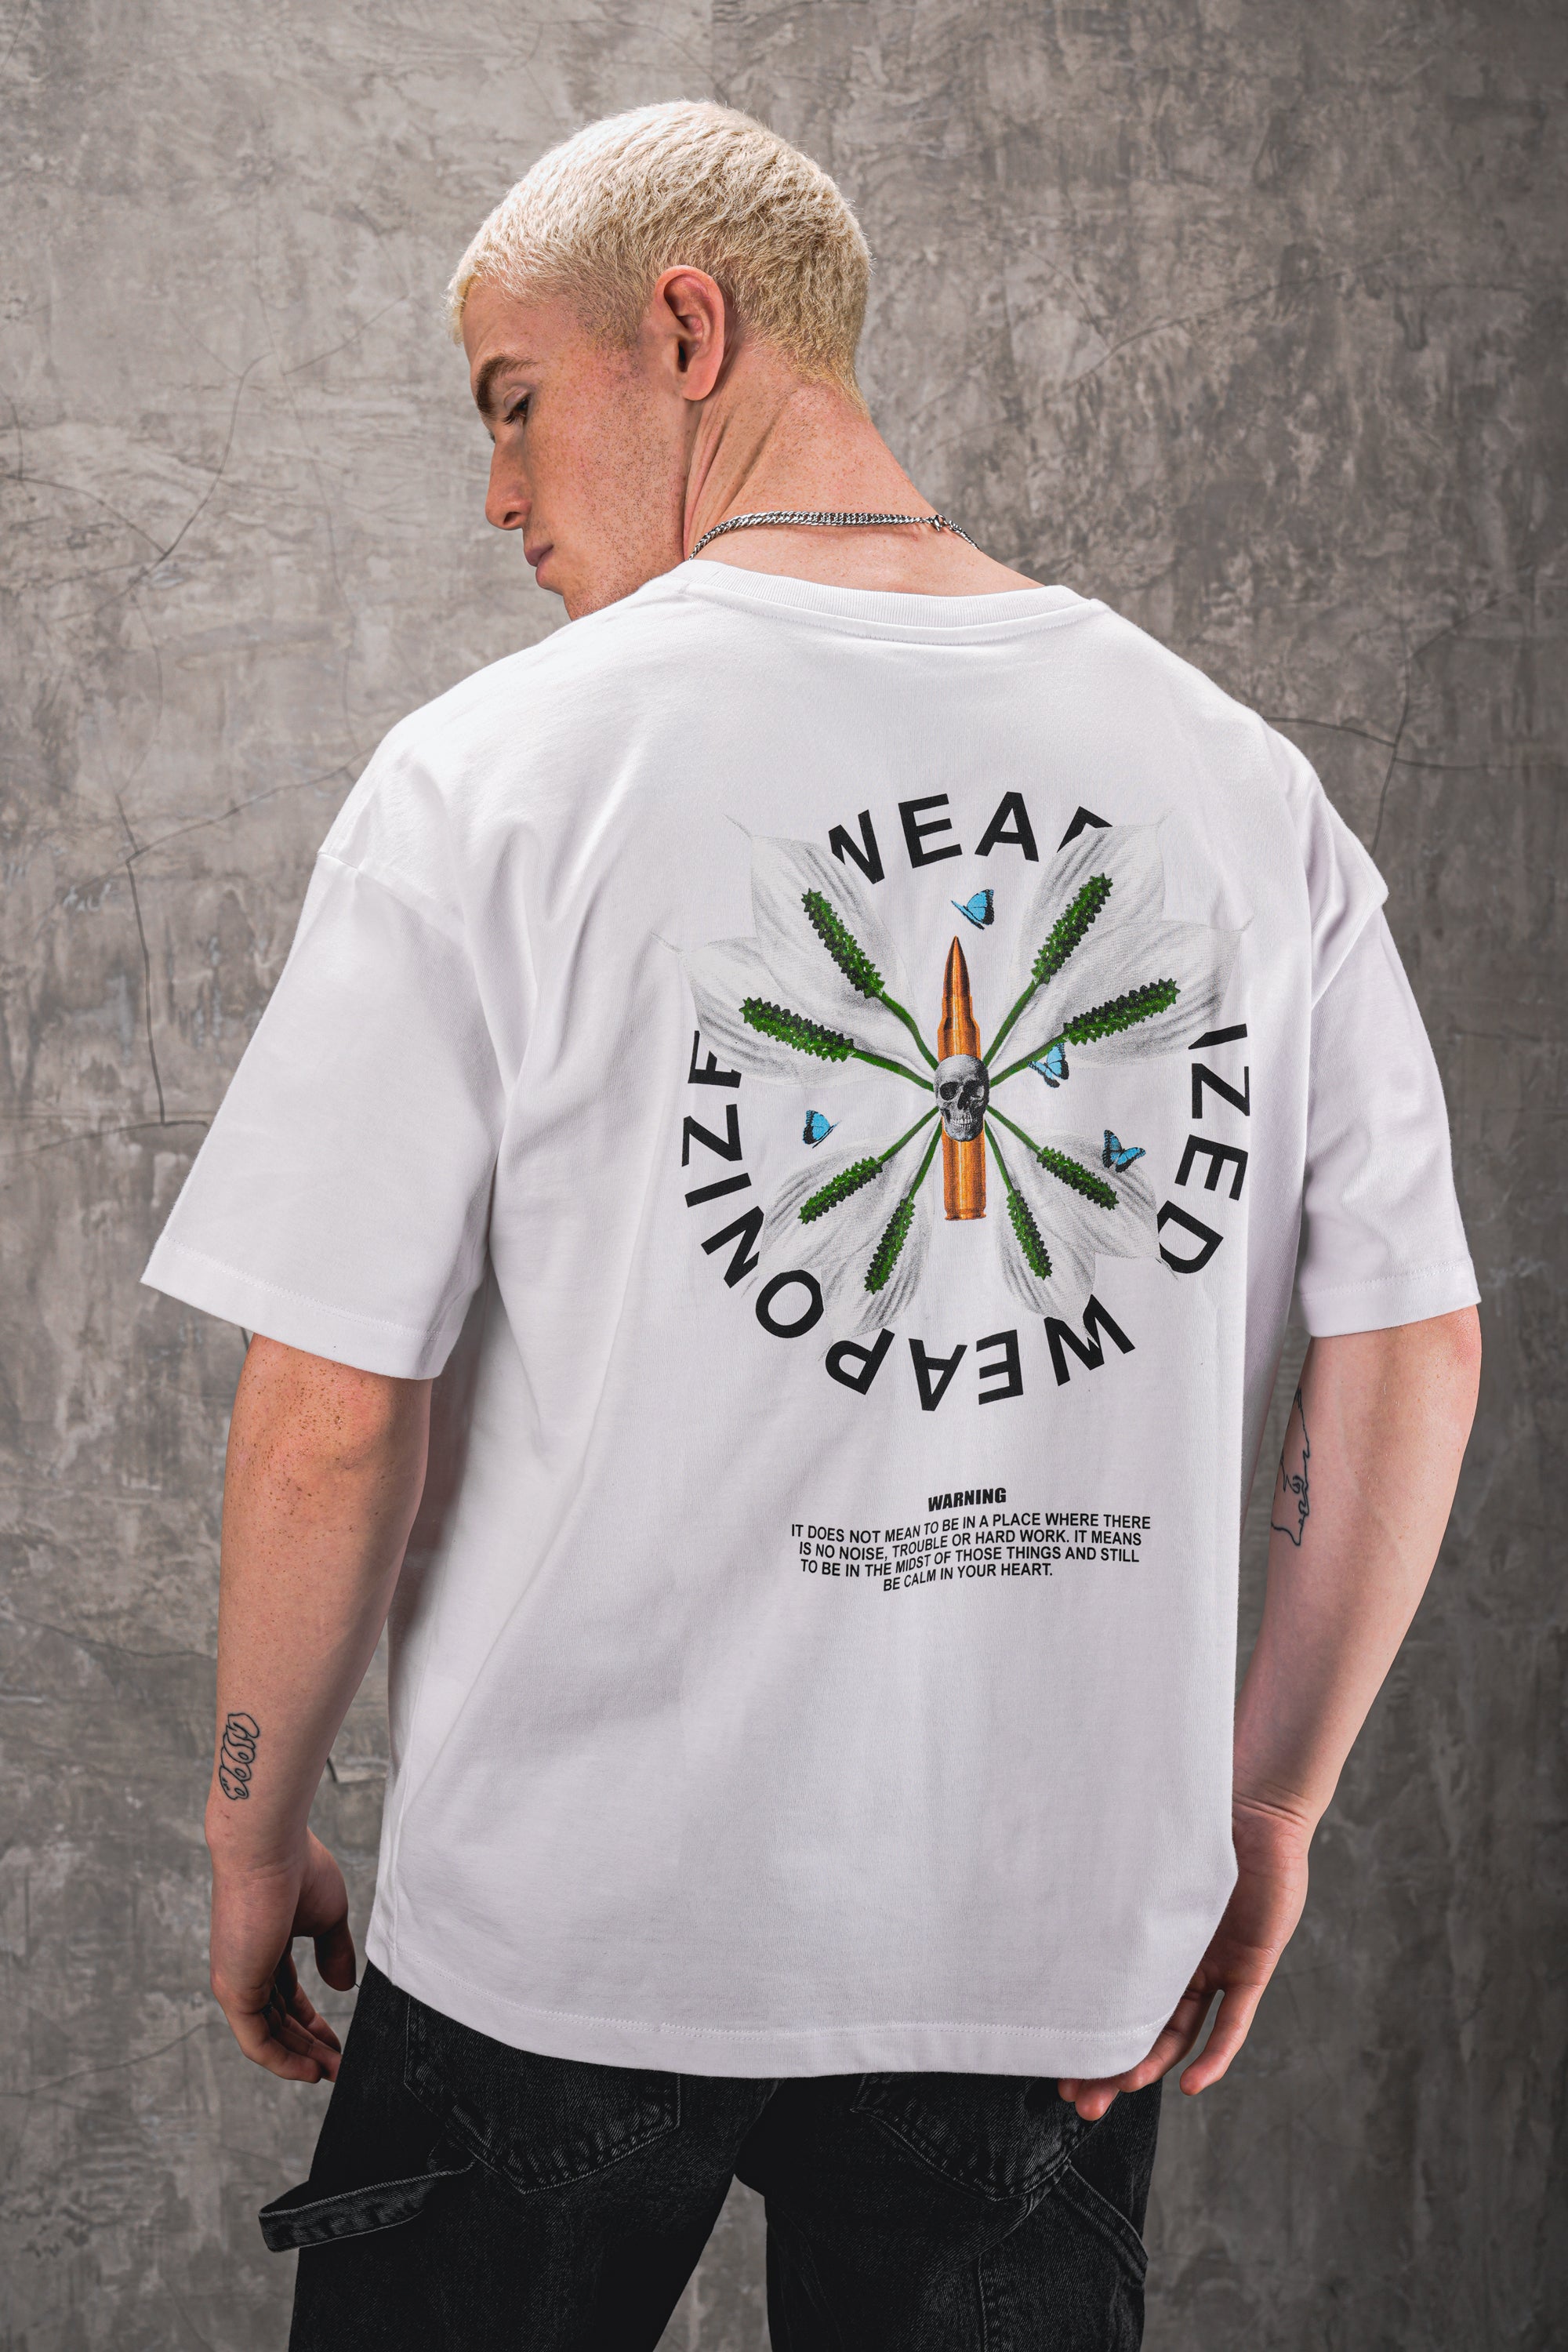 Weaponized 240GSM Oversized Tee - White - UNEFFECTED STUDIOS® - T-shirt - UNEFFECTED STUDIOS®